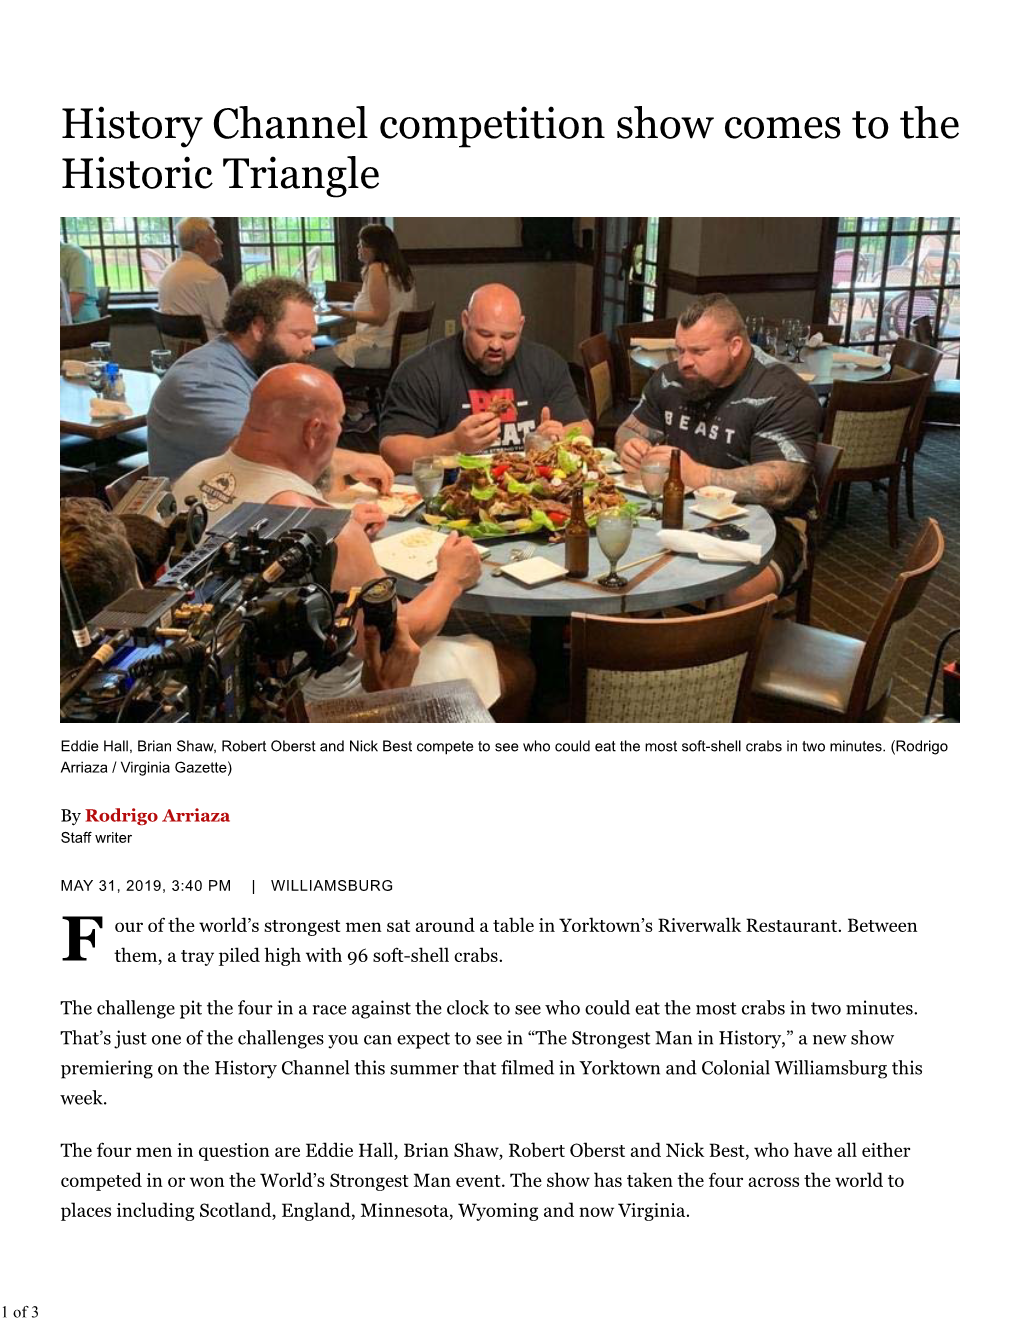 History Channel Competition Show Comes to the Historic Triangle